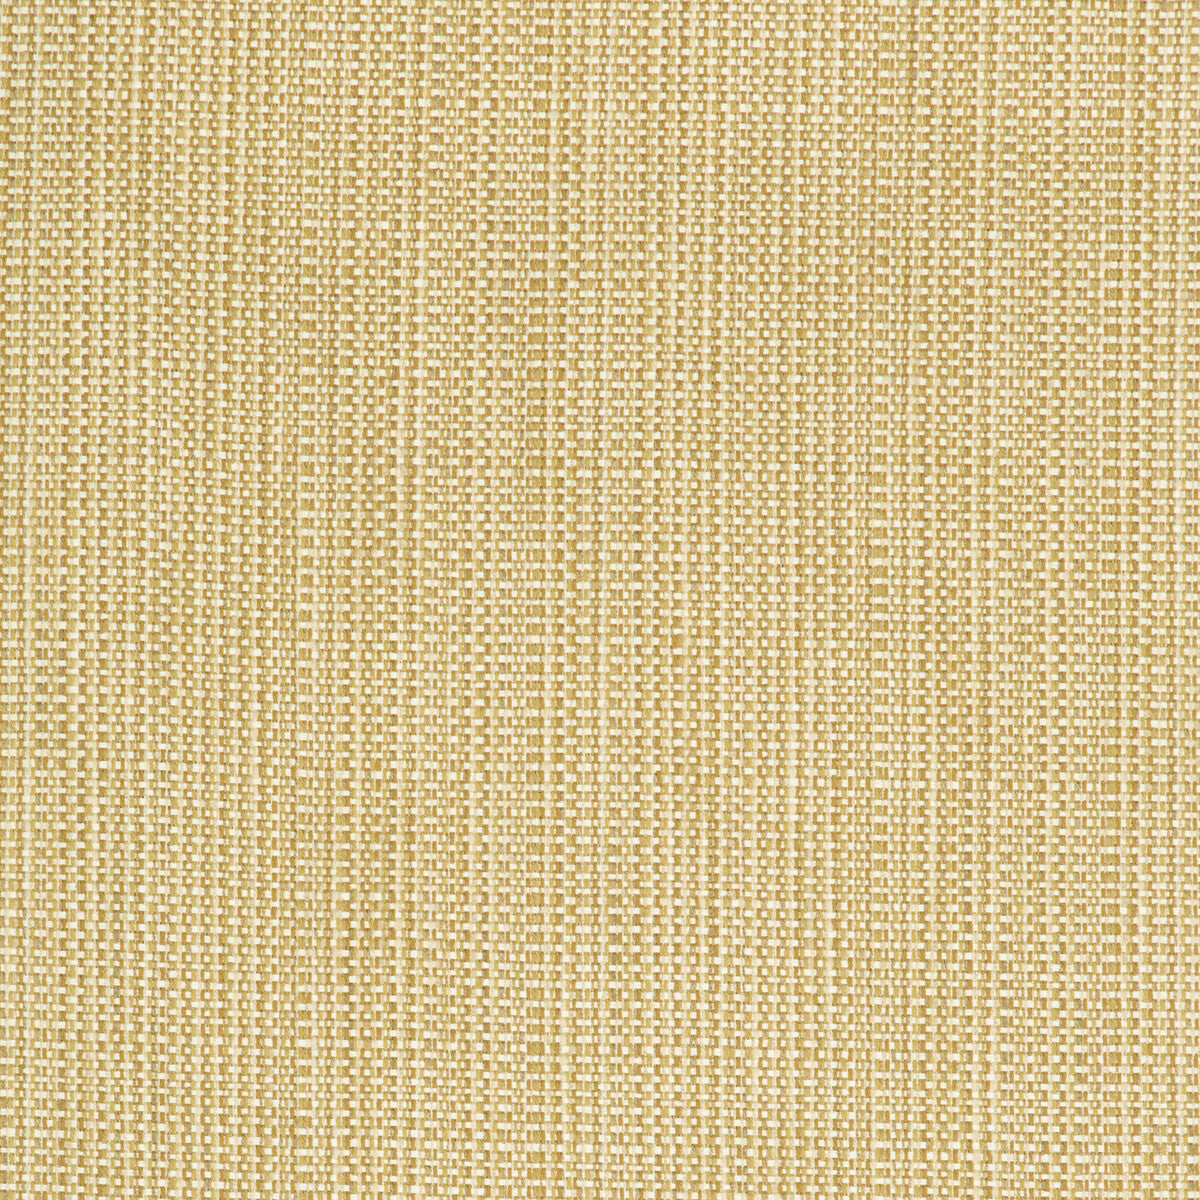 Kravet Smart fabric in 34627-416 color - pattern 34627.416.0 - by Kravet Smart in the Performance Crypton Home collection